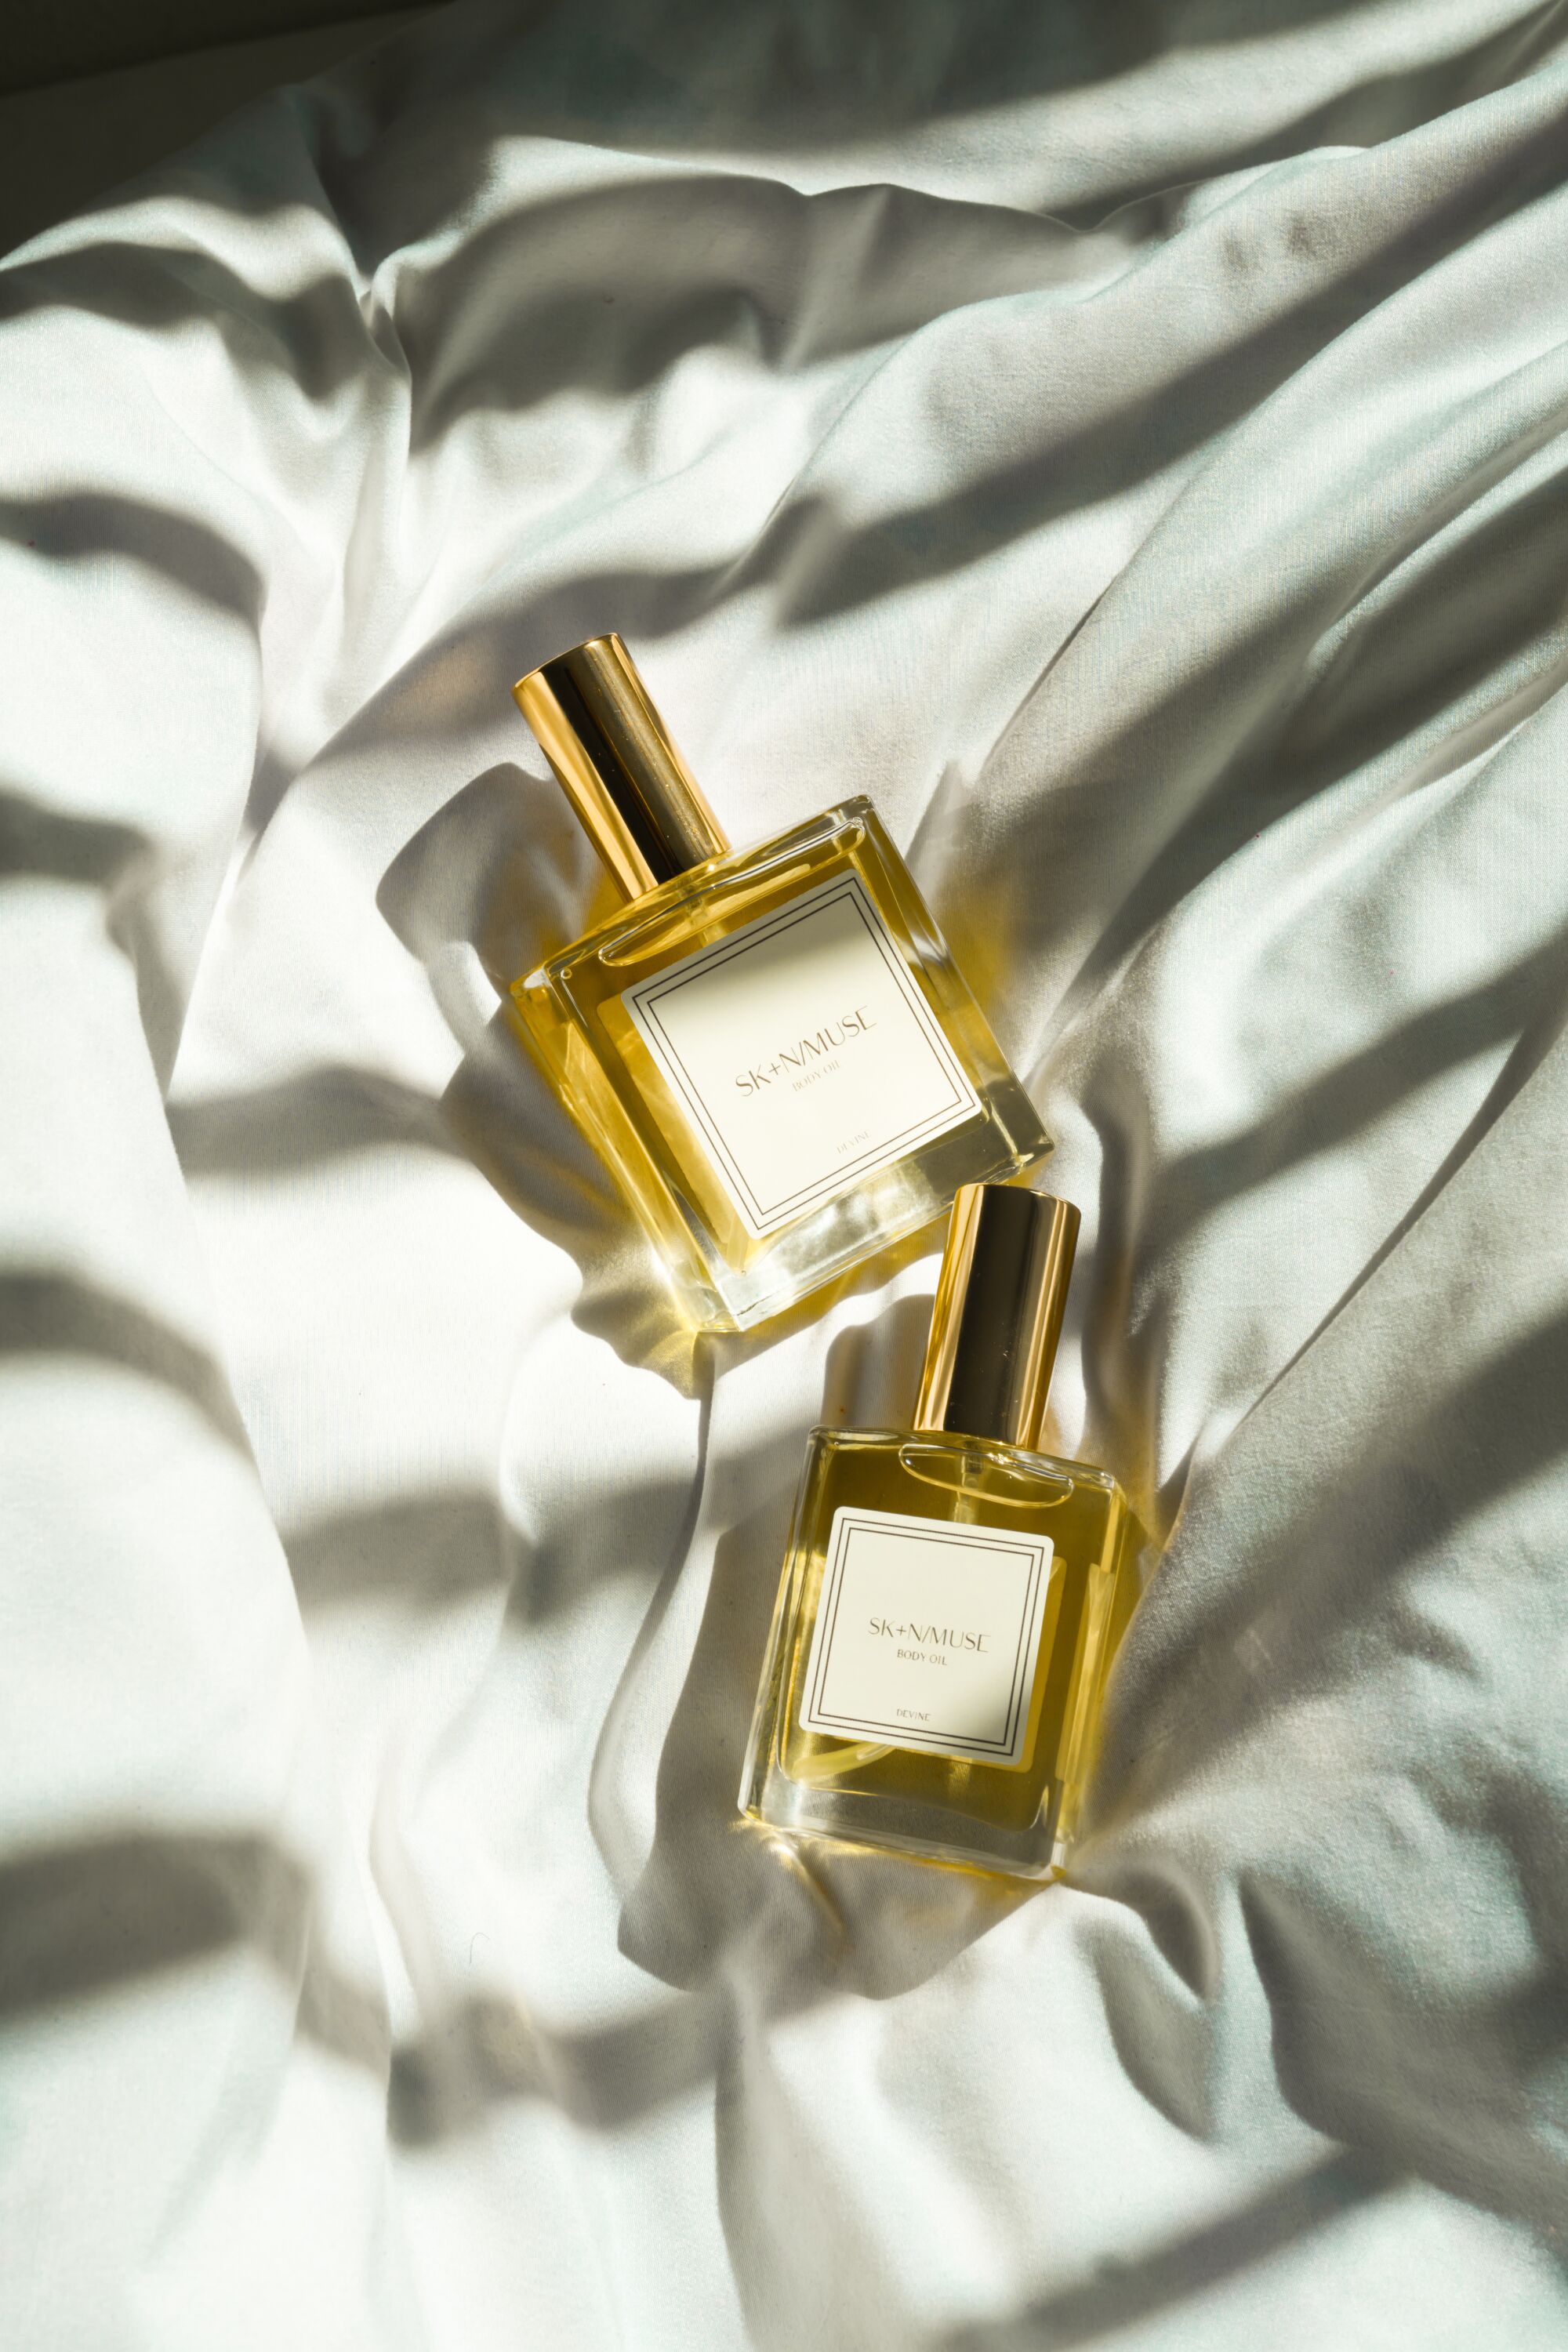 two SKNMUSE body oil bottles lying on white sheets with harsh window blind shadows cast on top of them